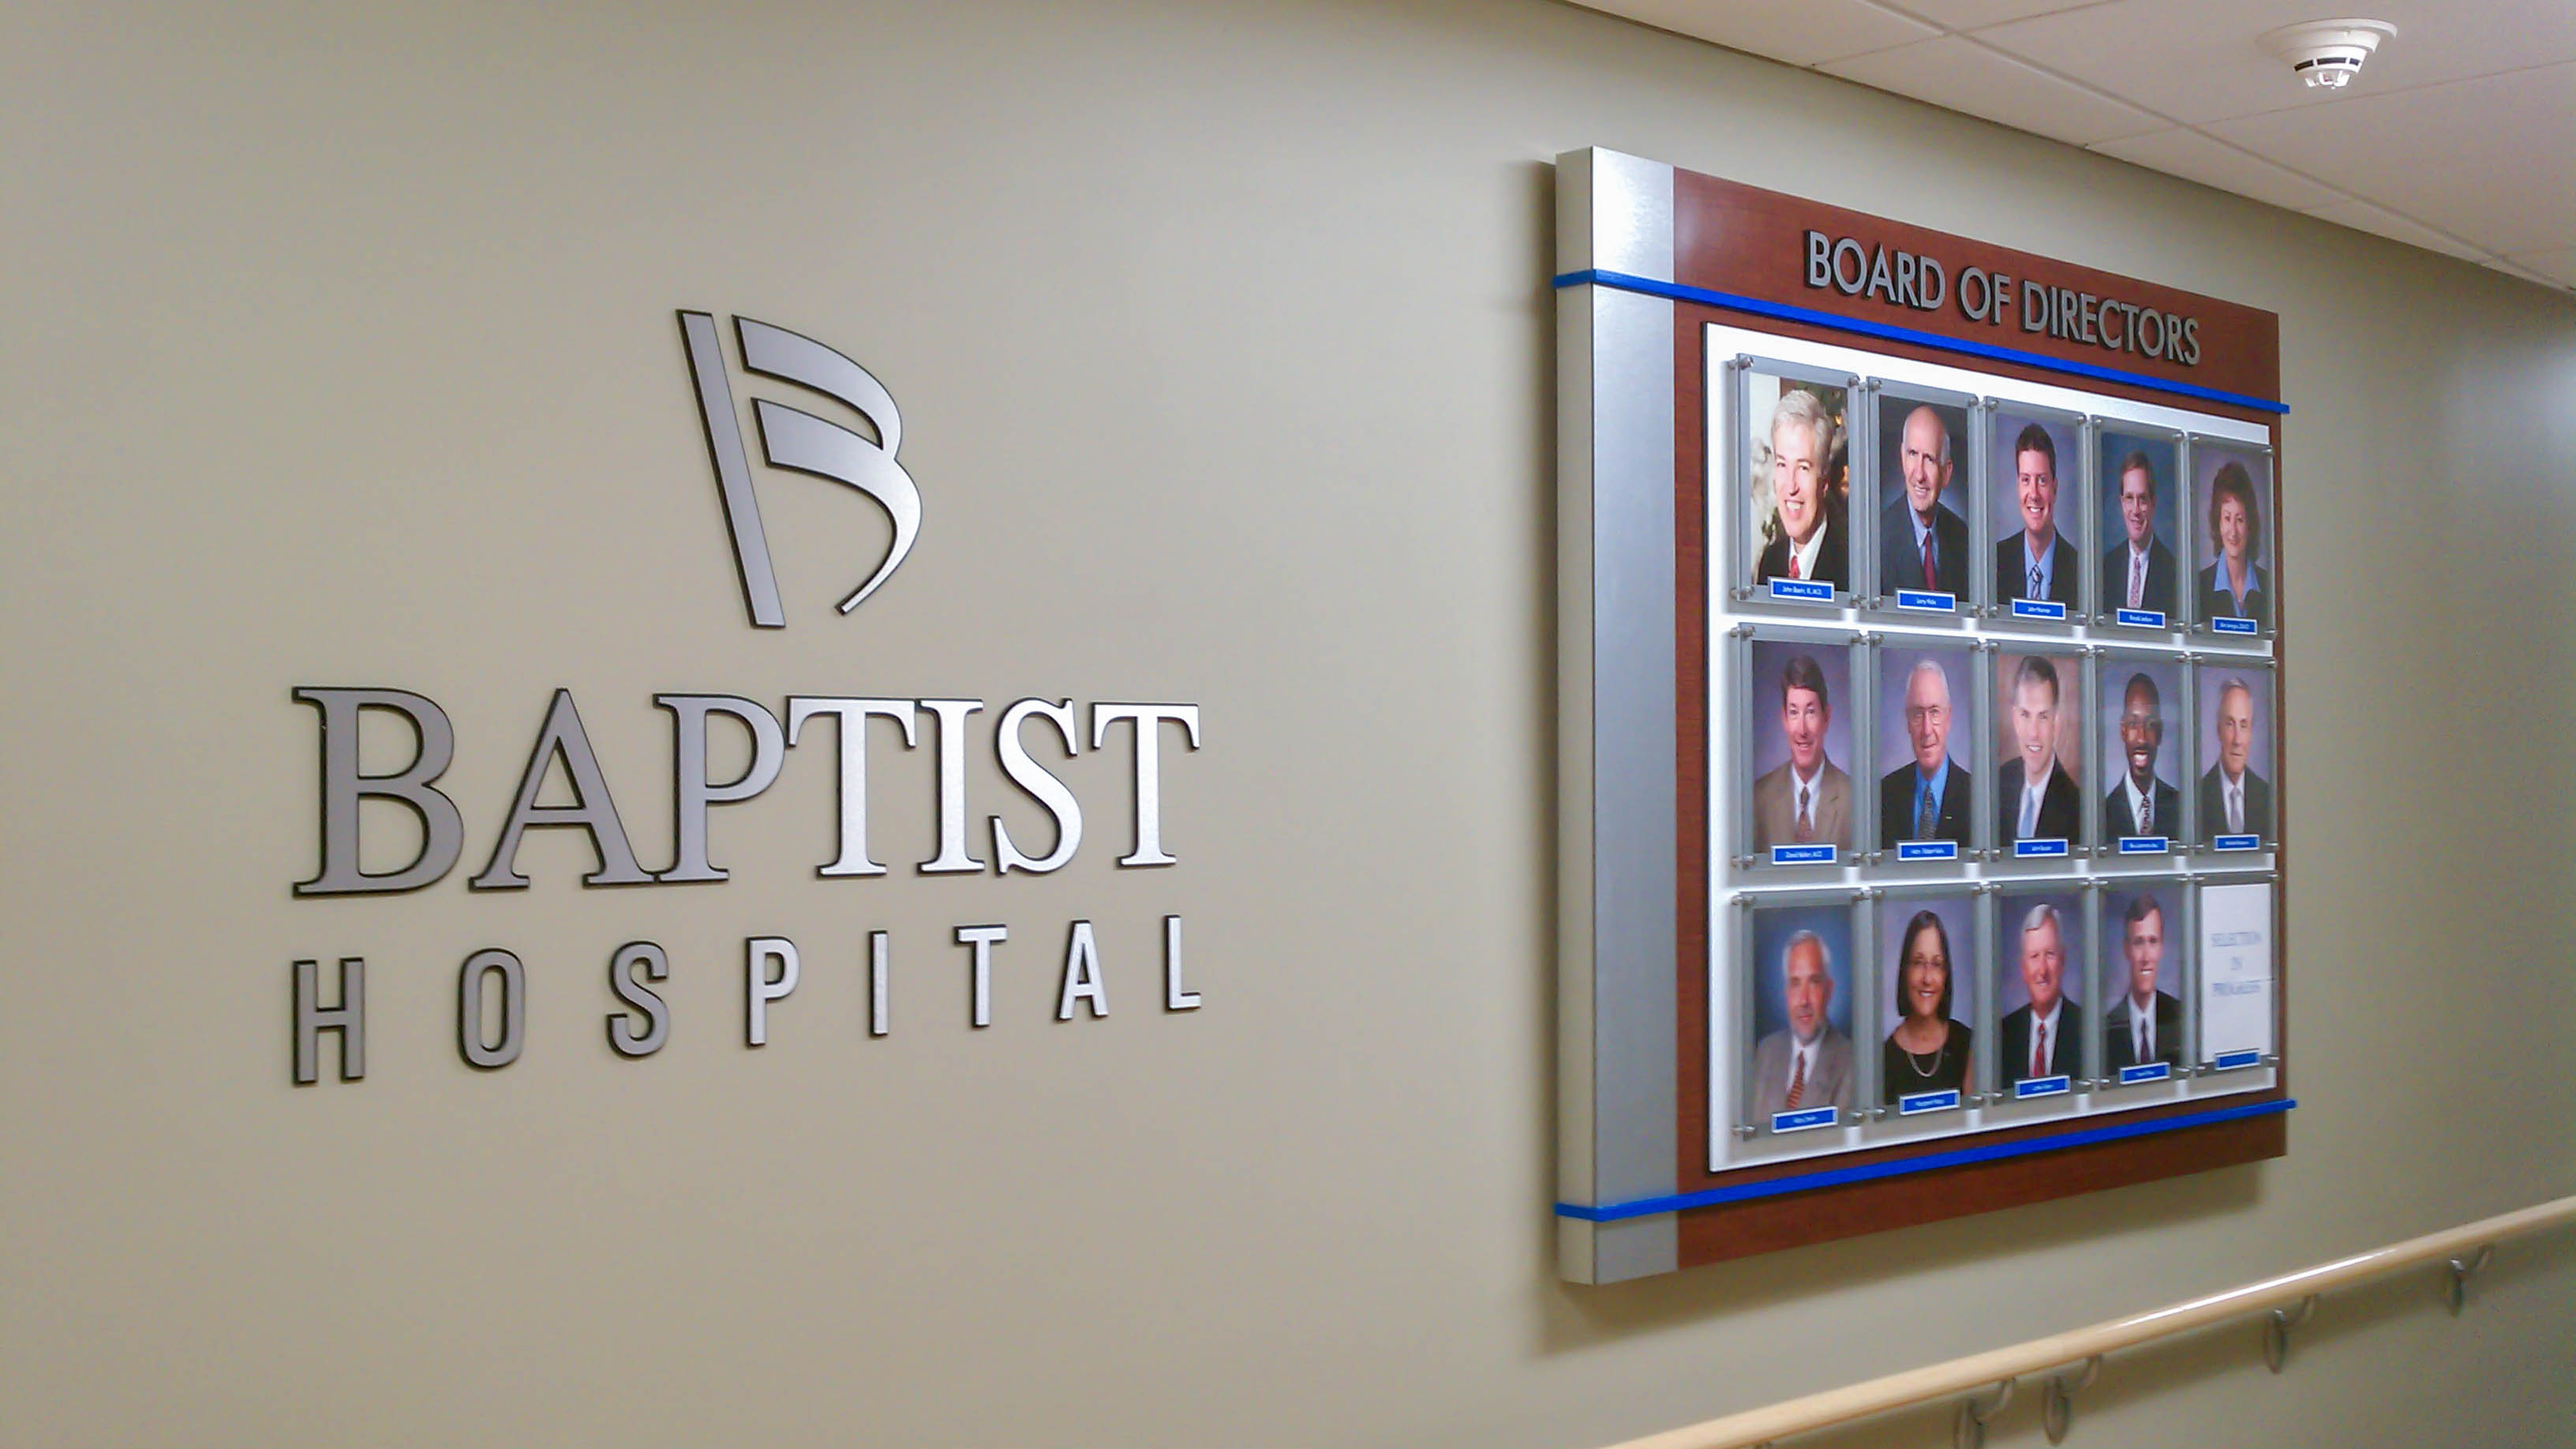 Interior board of directors photo display and dimensional lettering for Baptist Hospital - signgeek Branded Environments 